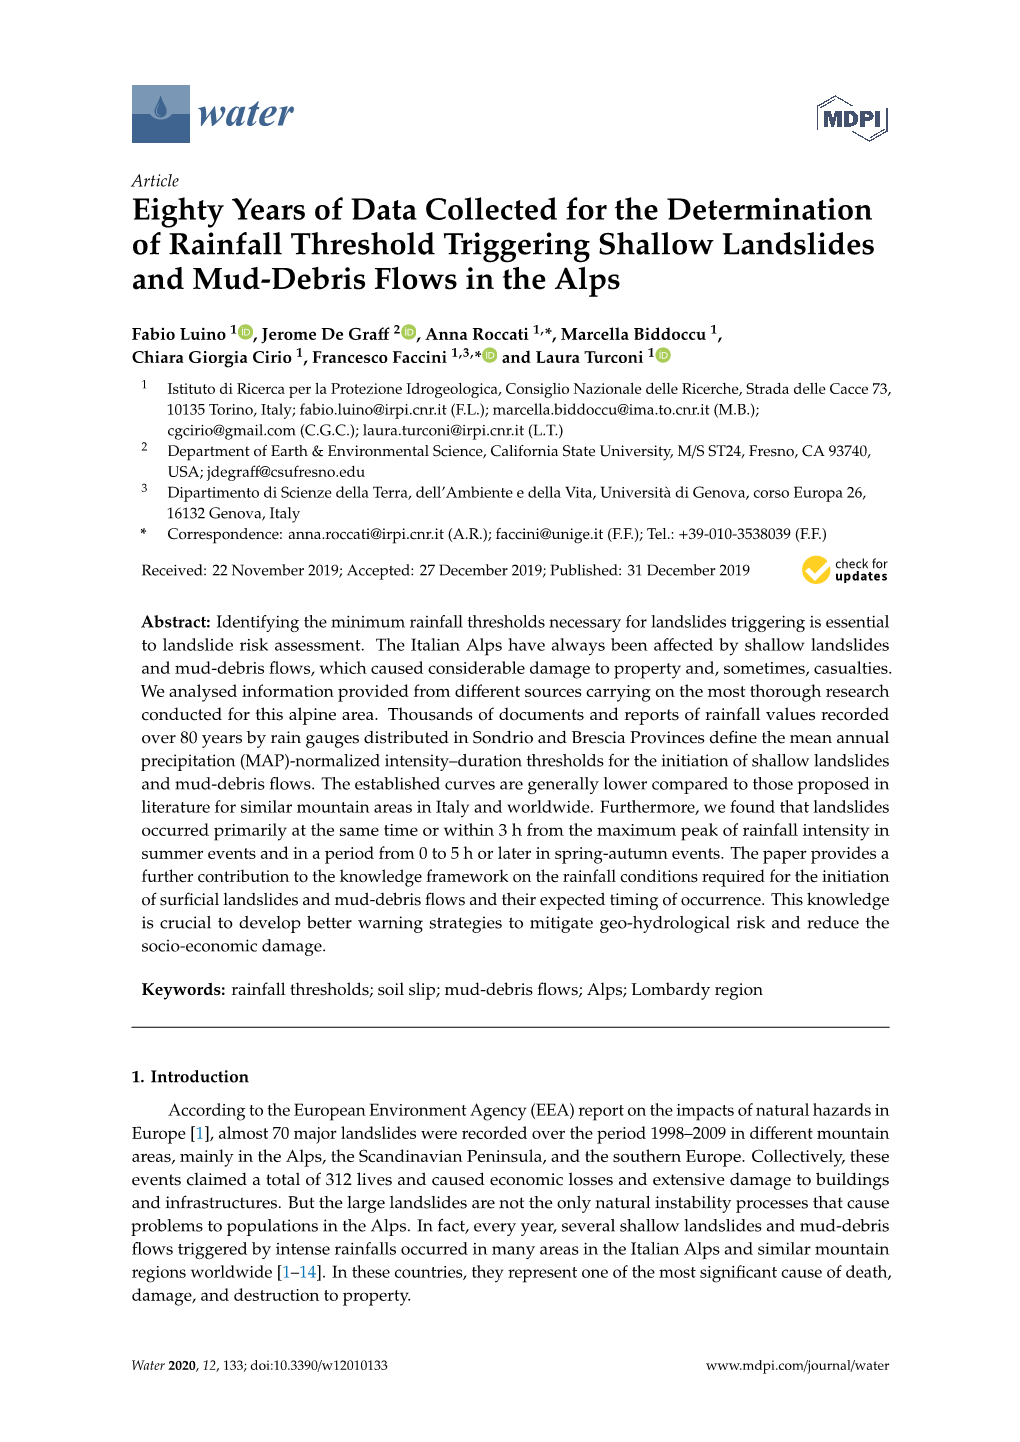 Eighty Years of Data Collected for the Determination of Rainfall Threshold Triggering Shallow Landslides and Mud-Debris Flows in the Alps